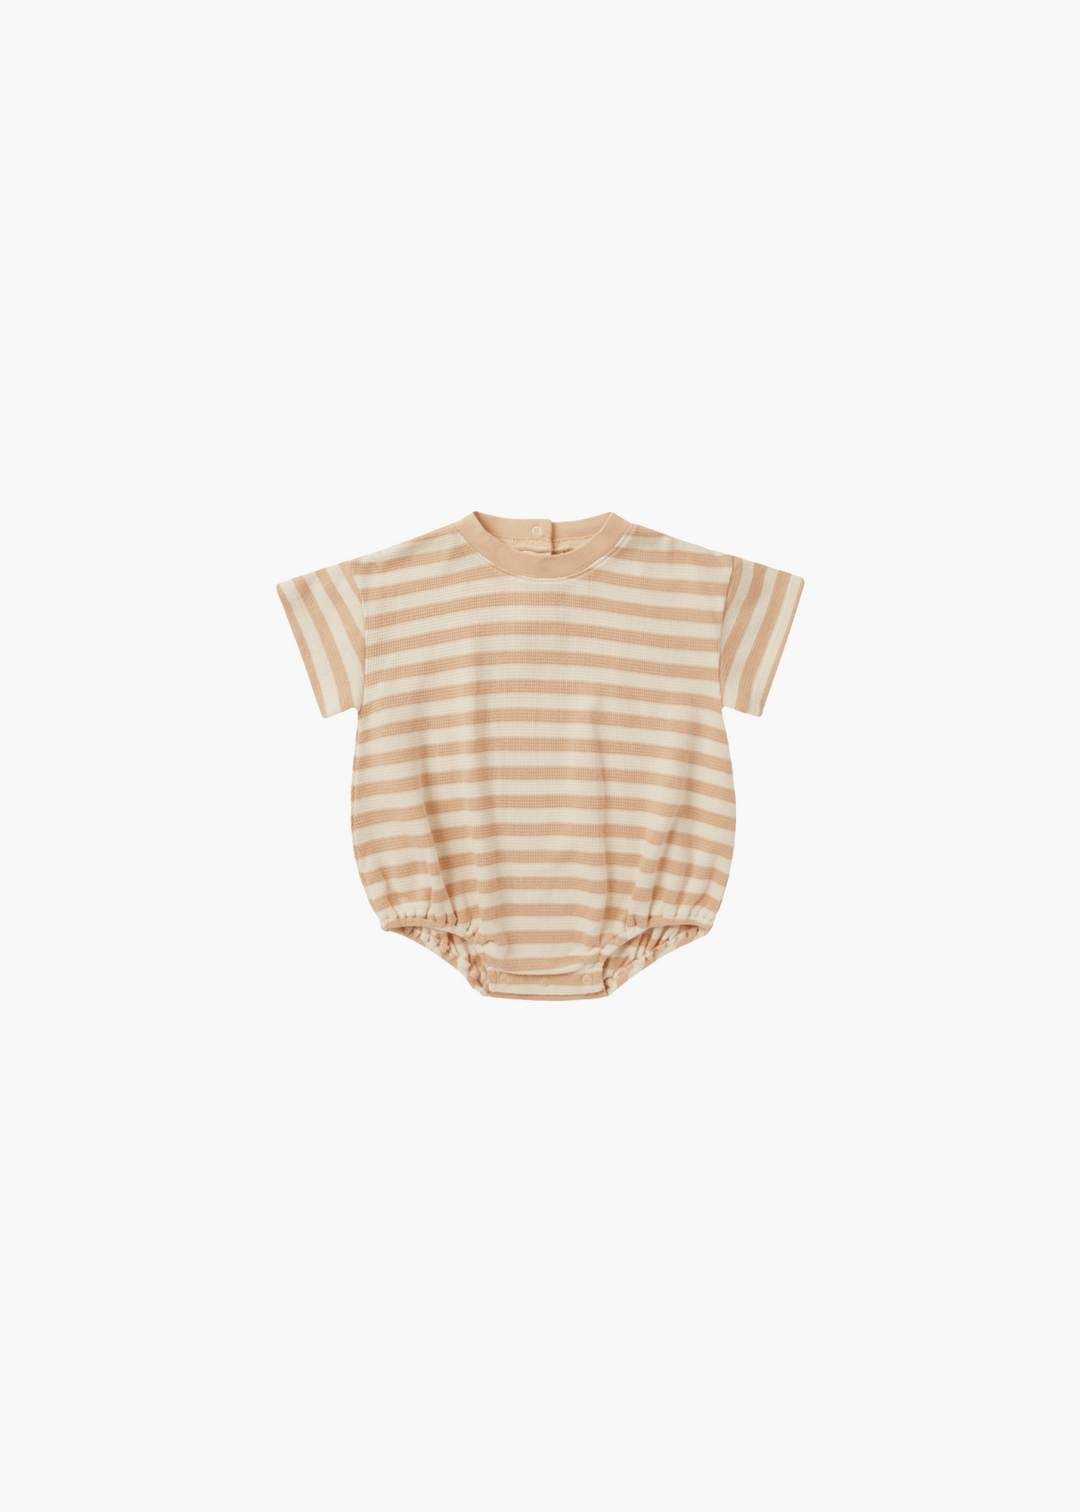 Relaxed Bubble Romper || Apricot Stripe